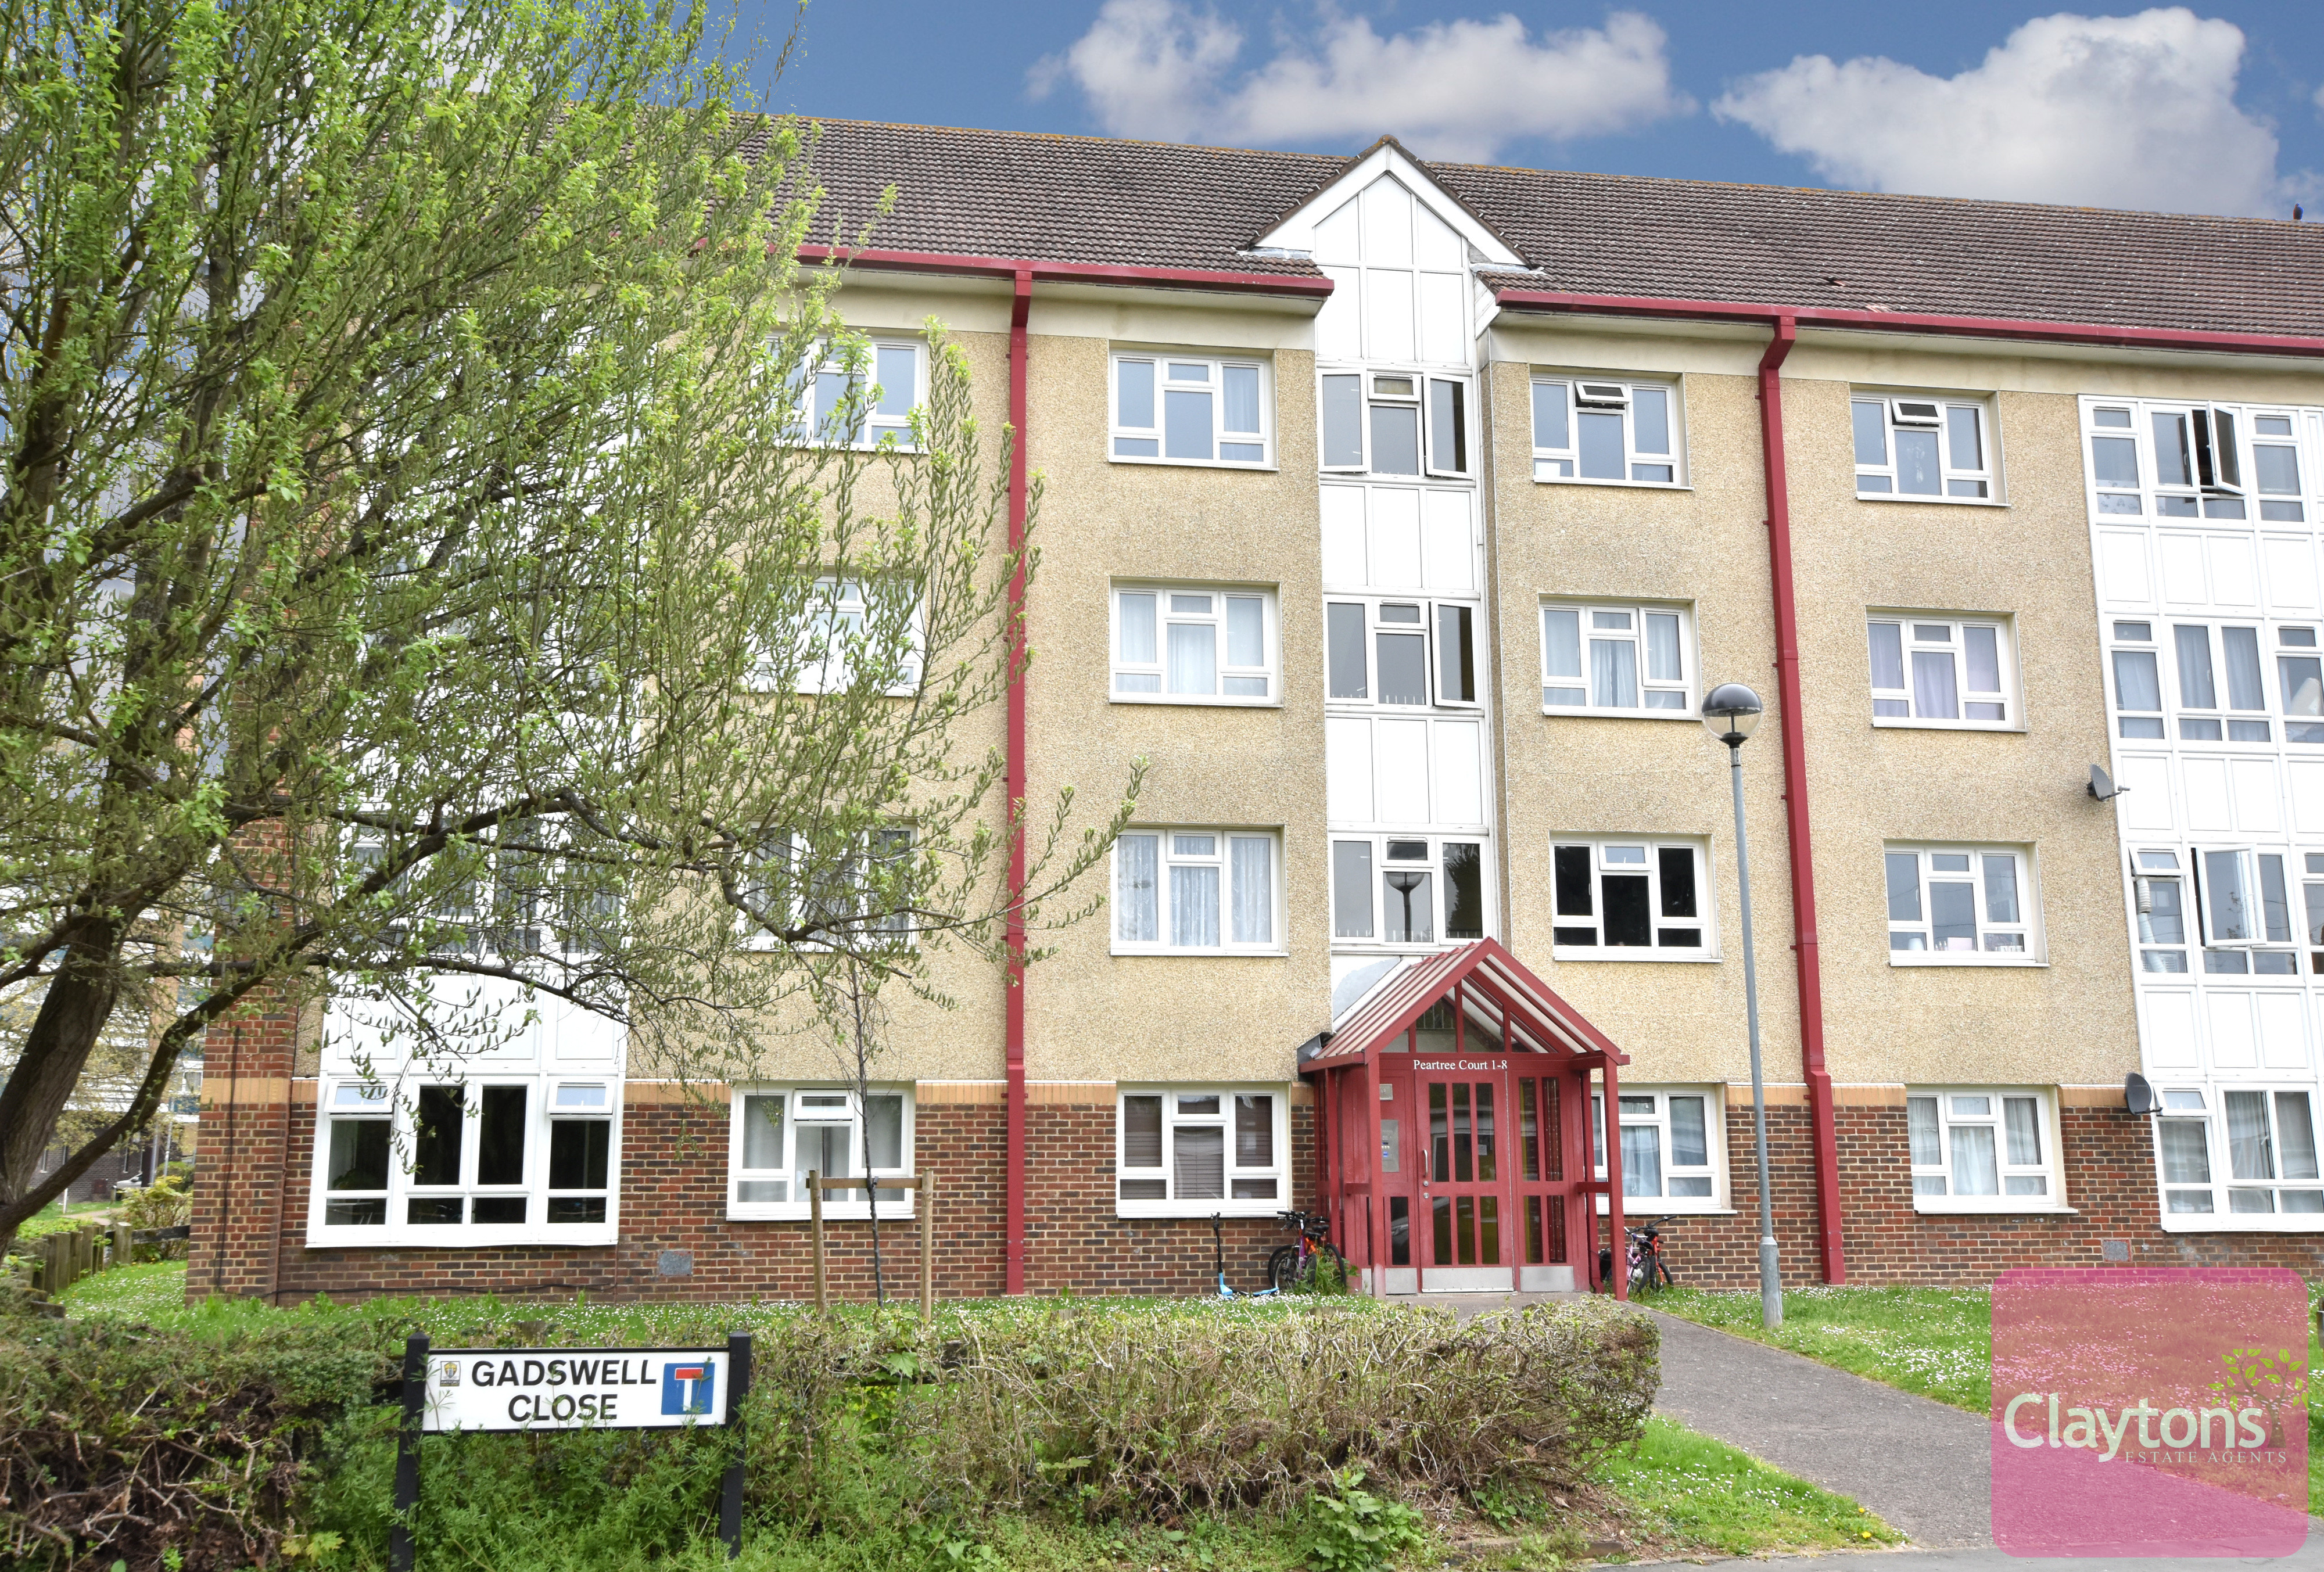 Peartree Court, Gadswell Close, Watford